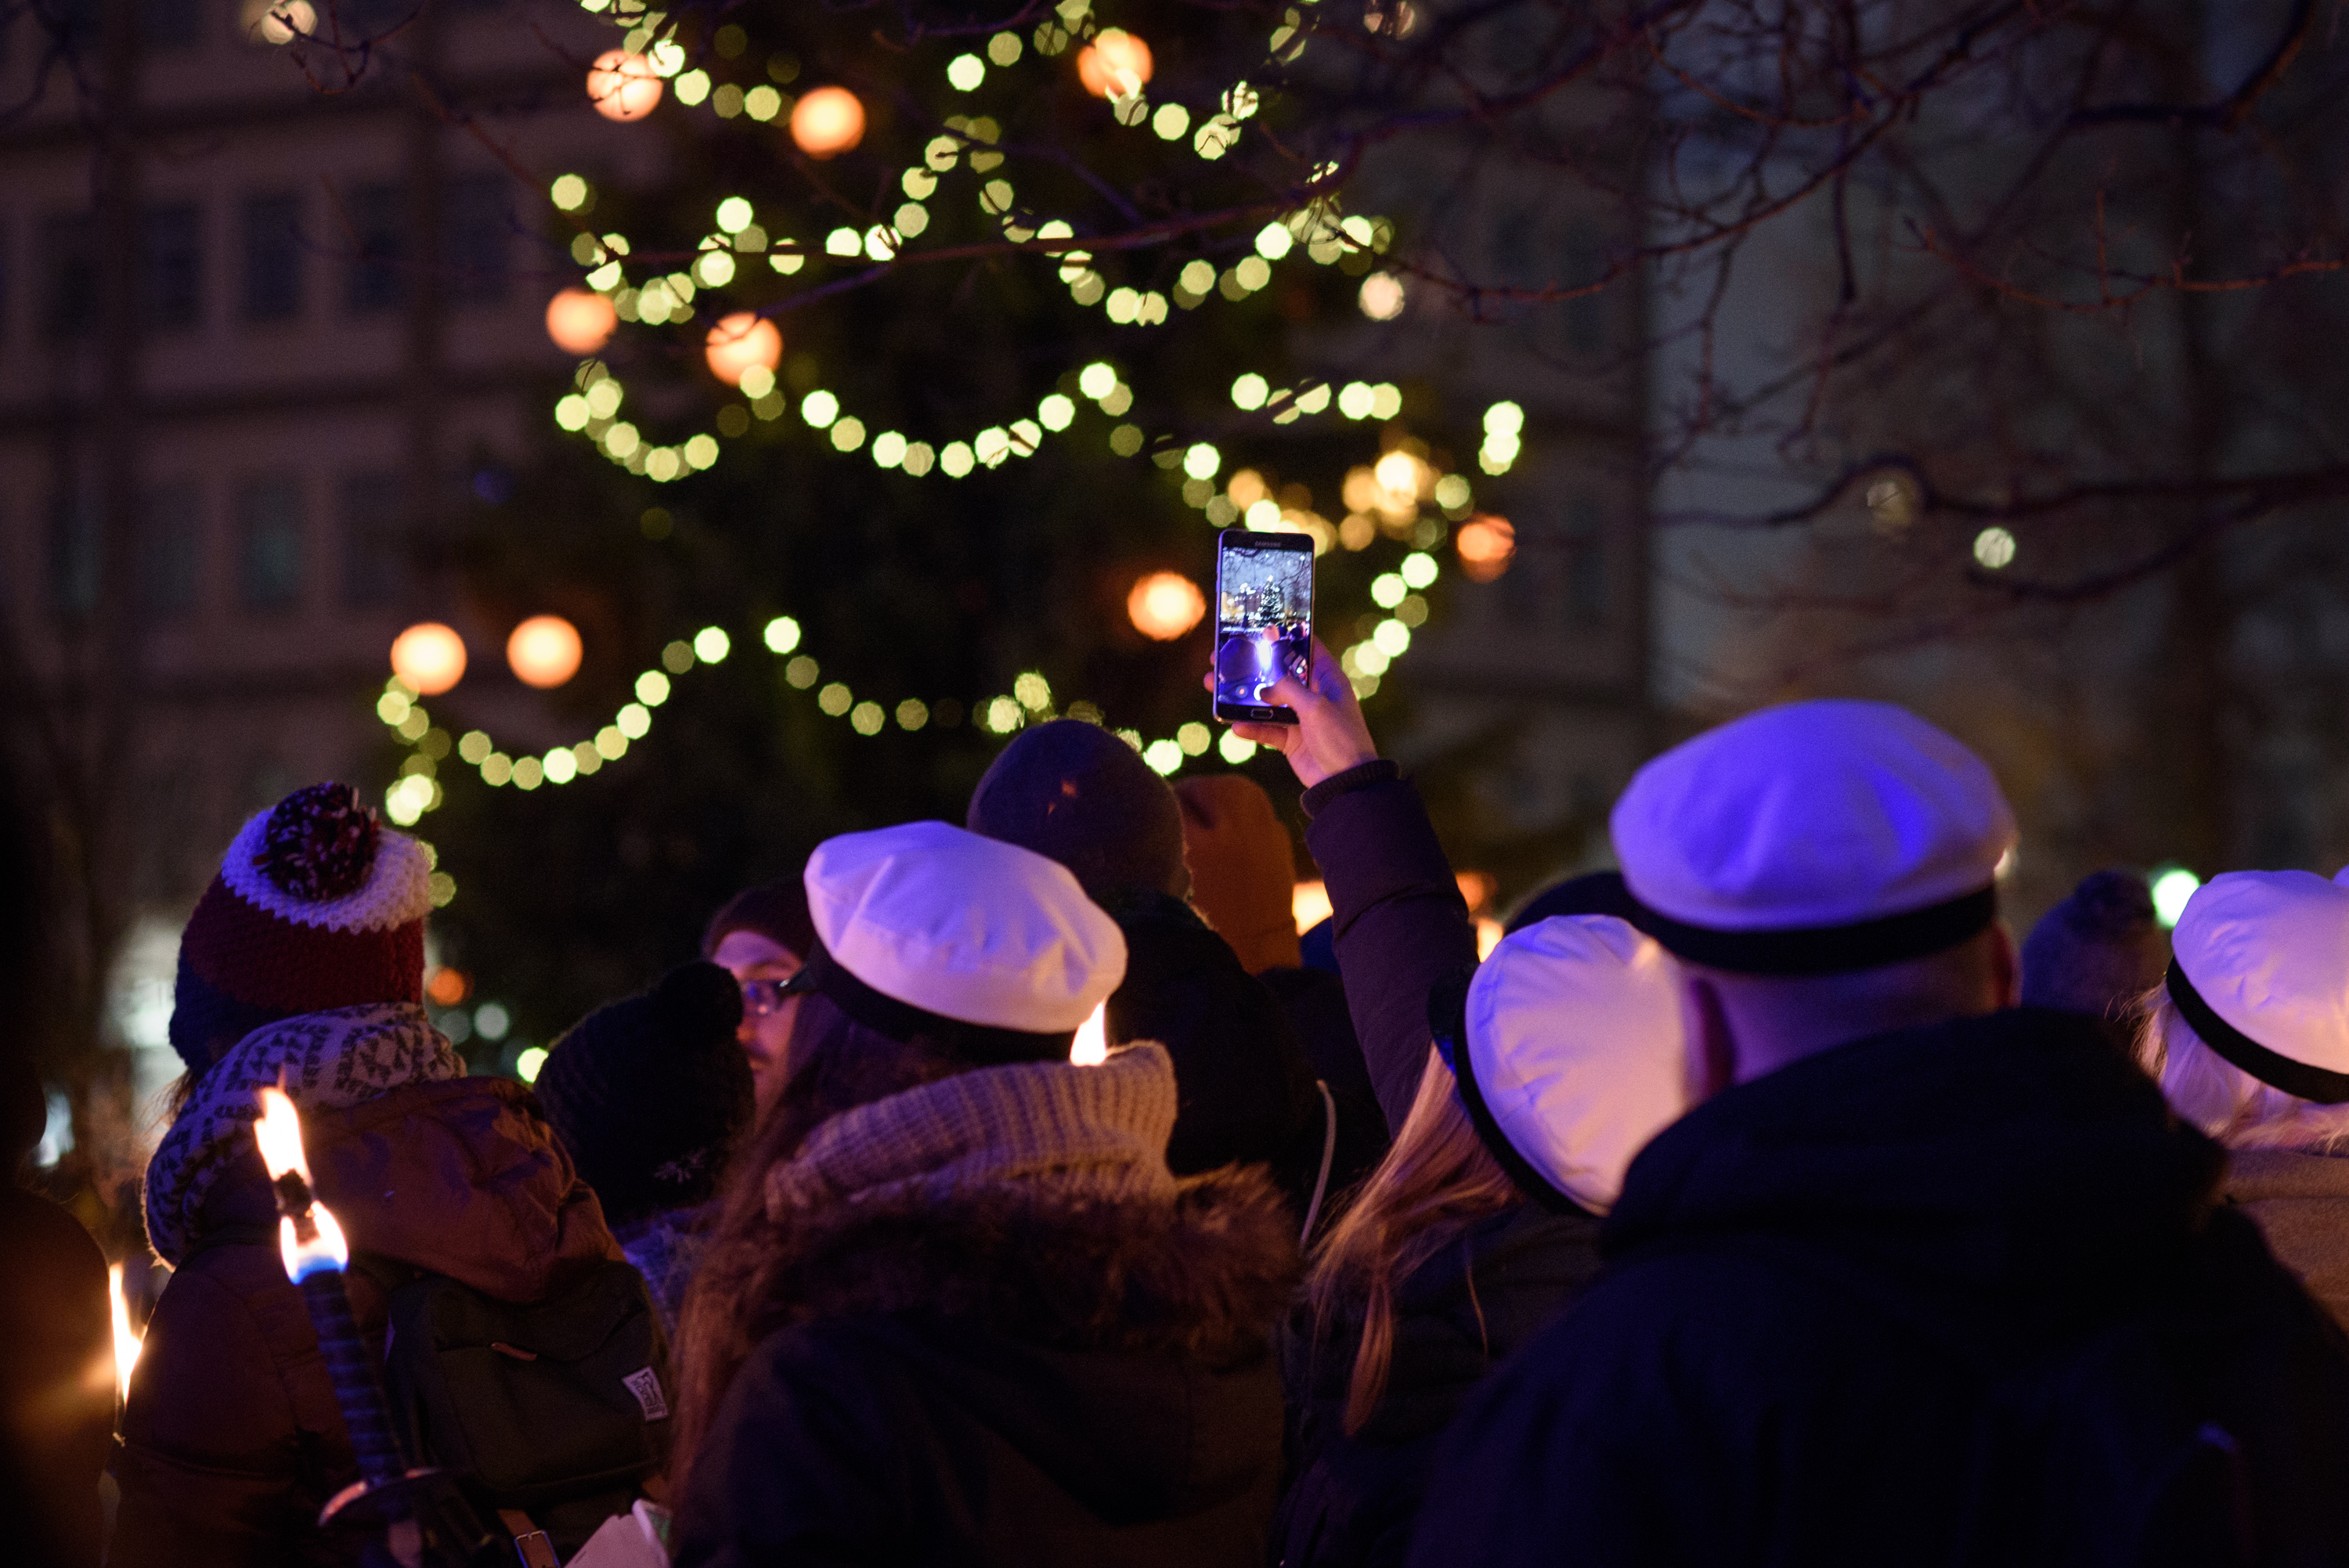 "In Oulu, there seem to be a lot of events for students, and something is always going on", writes Morgan Neering. Picture from last year's Independence Day Torchlight Procession in Oulu.